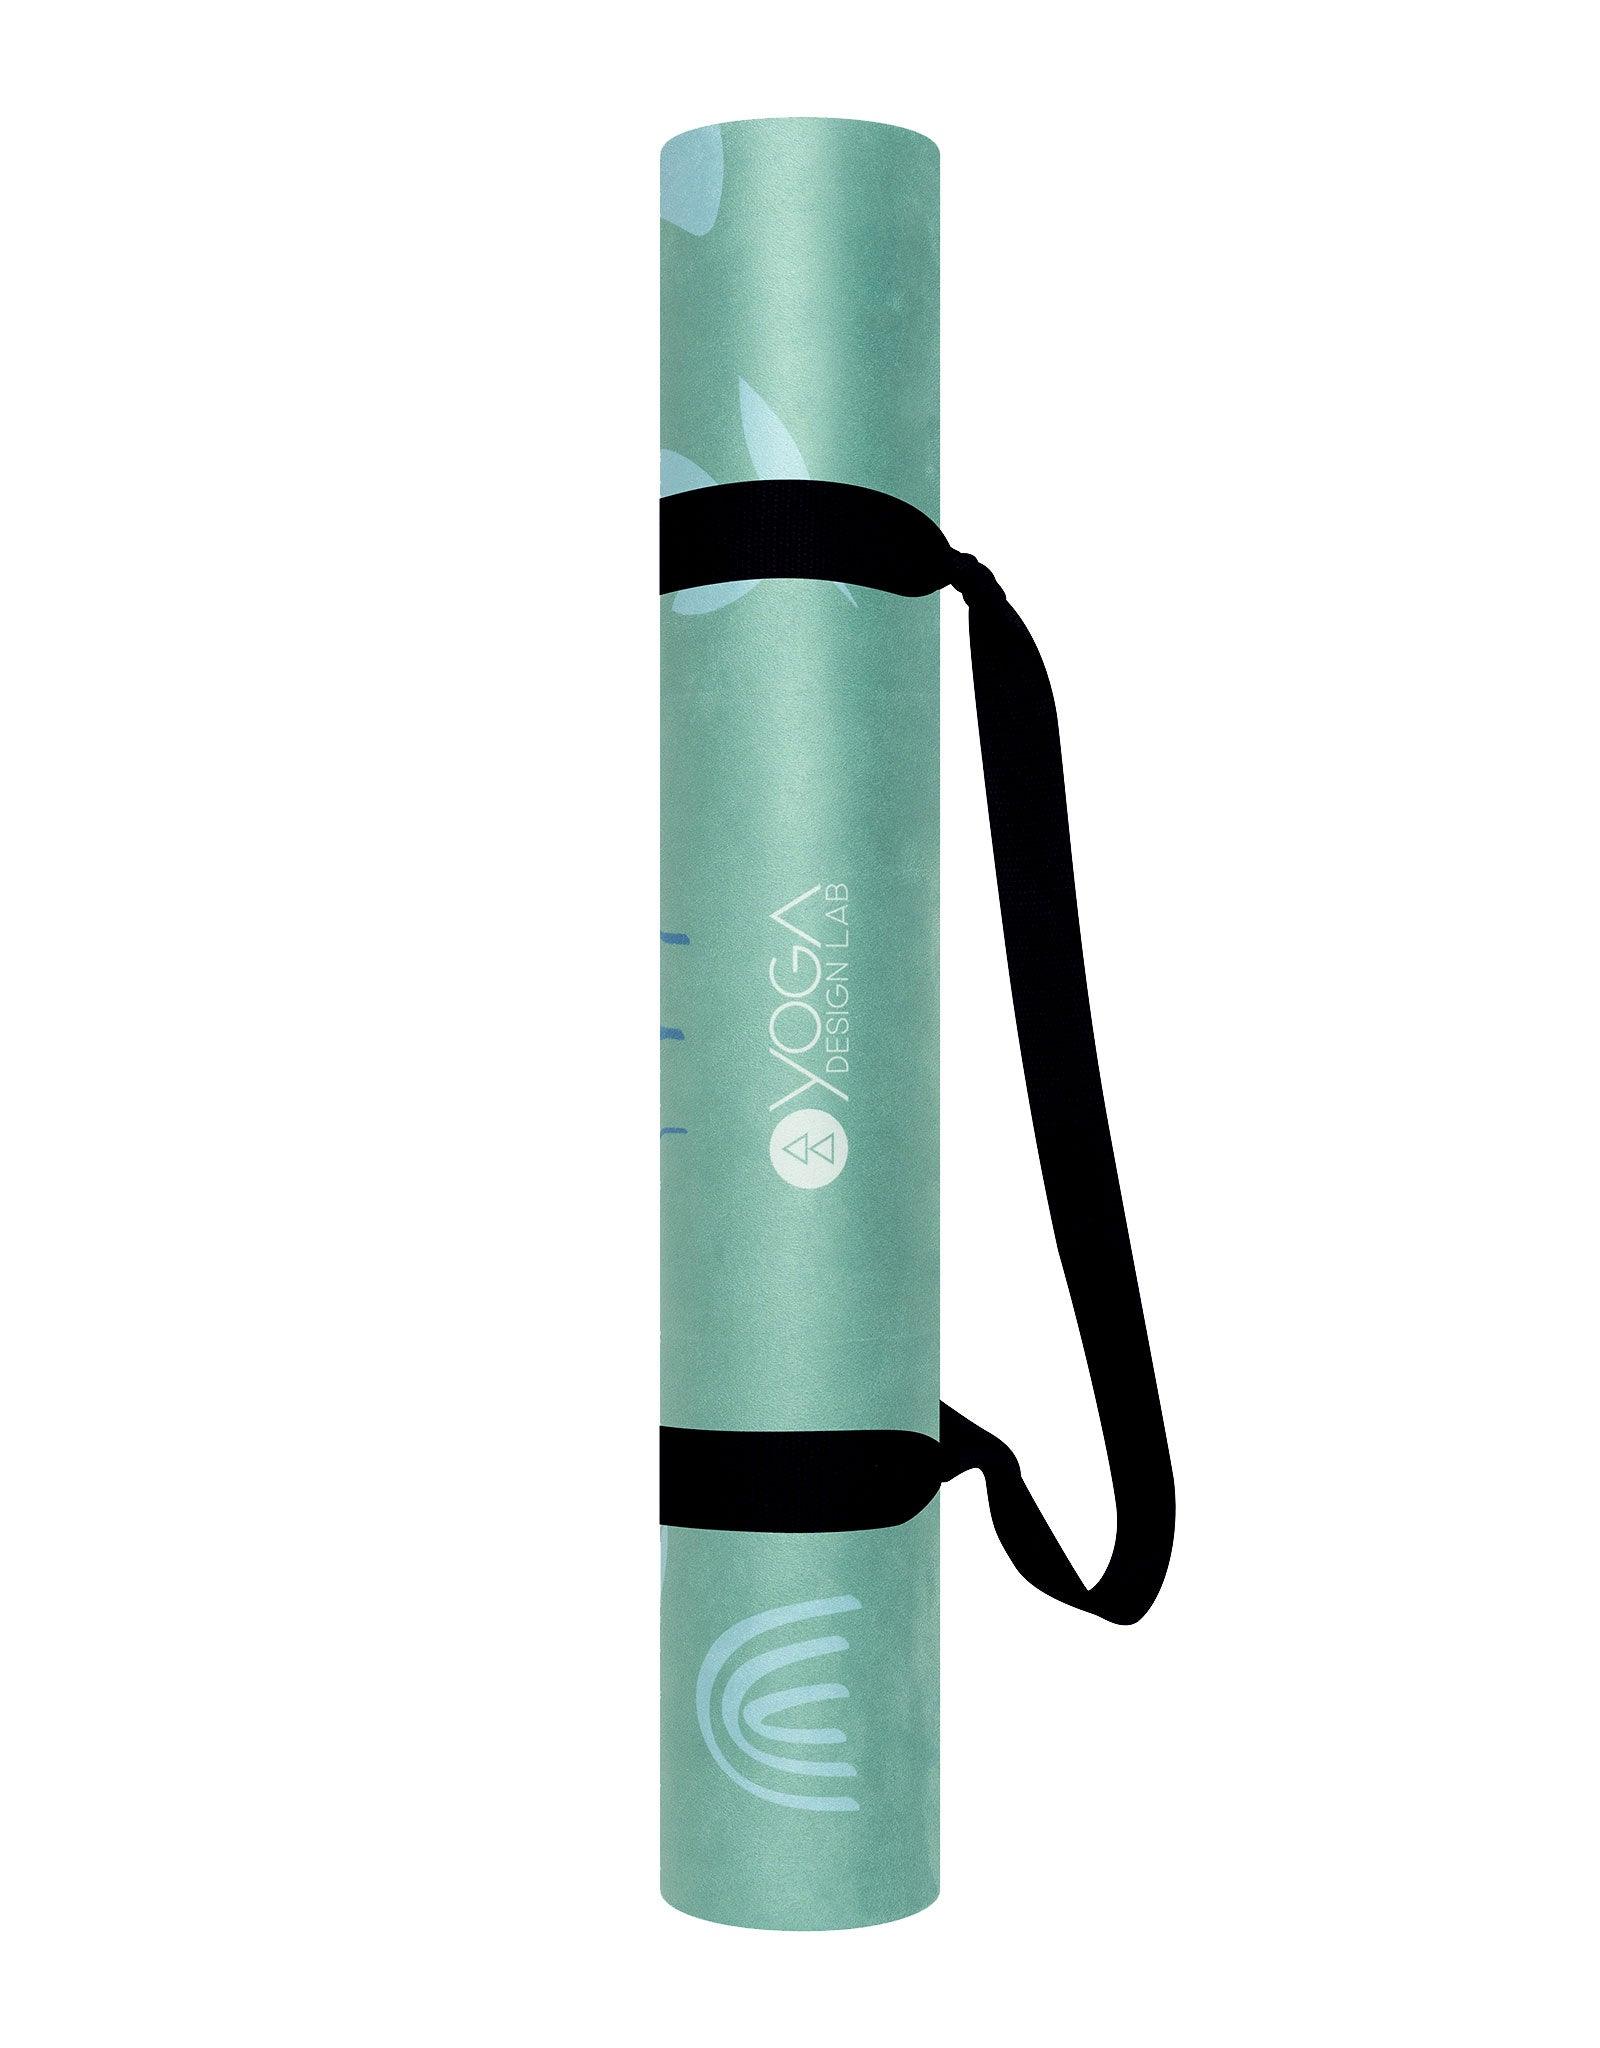 Lotus Pattern Suede Yoga Mat – New Trend Gadgets